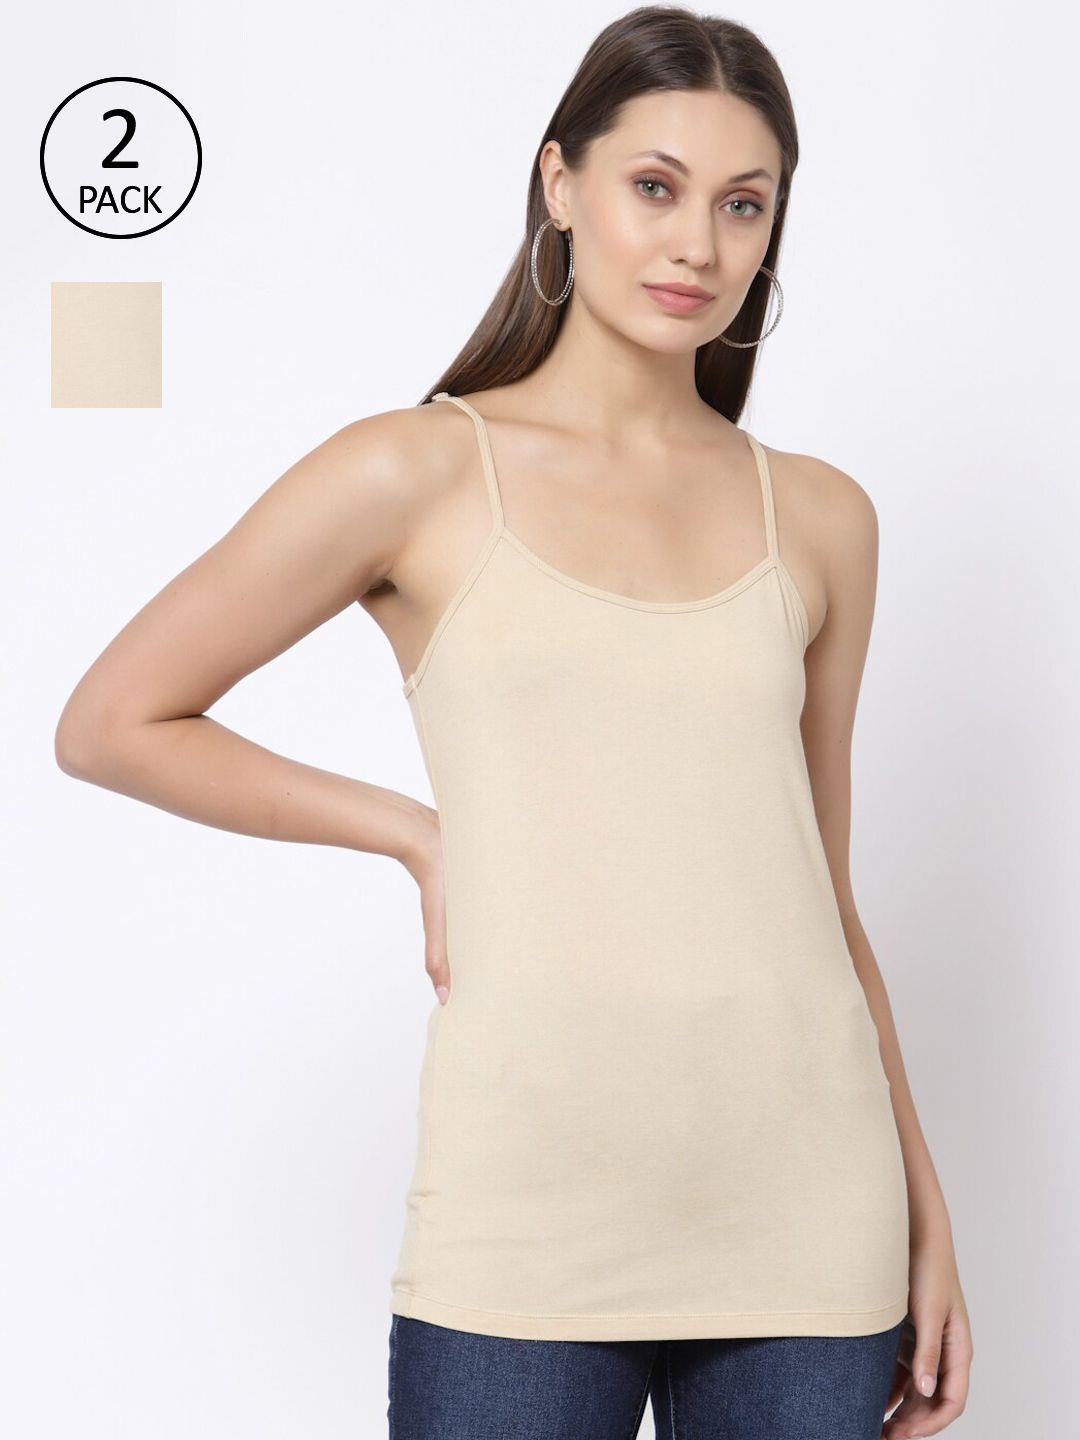 yoonoy-women-pack-of-2-solid-anti-odor-camisole